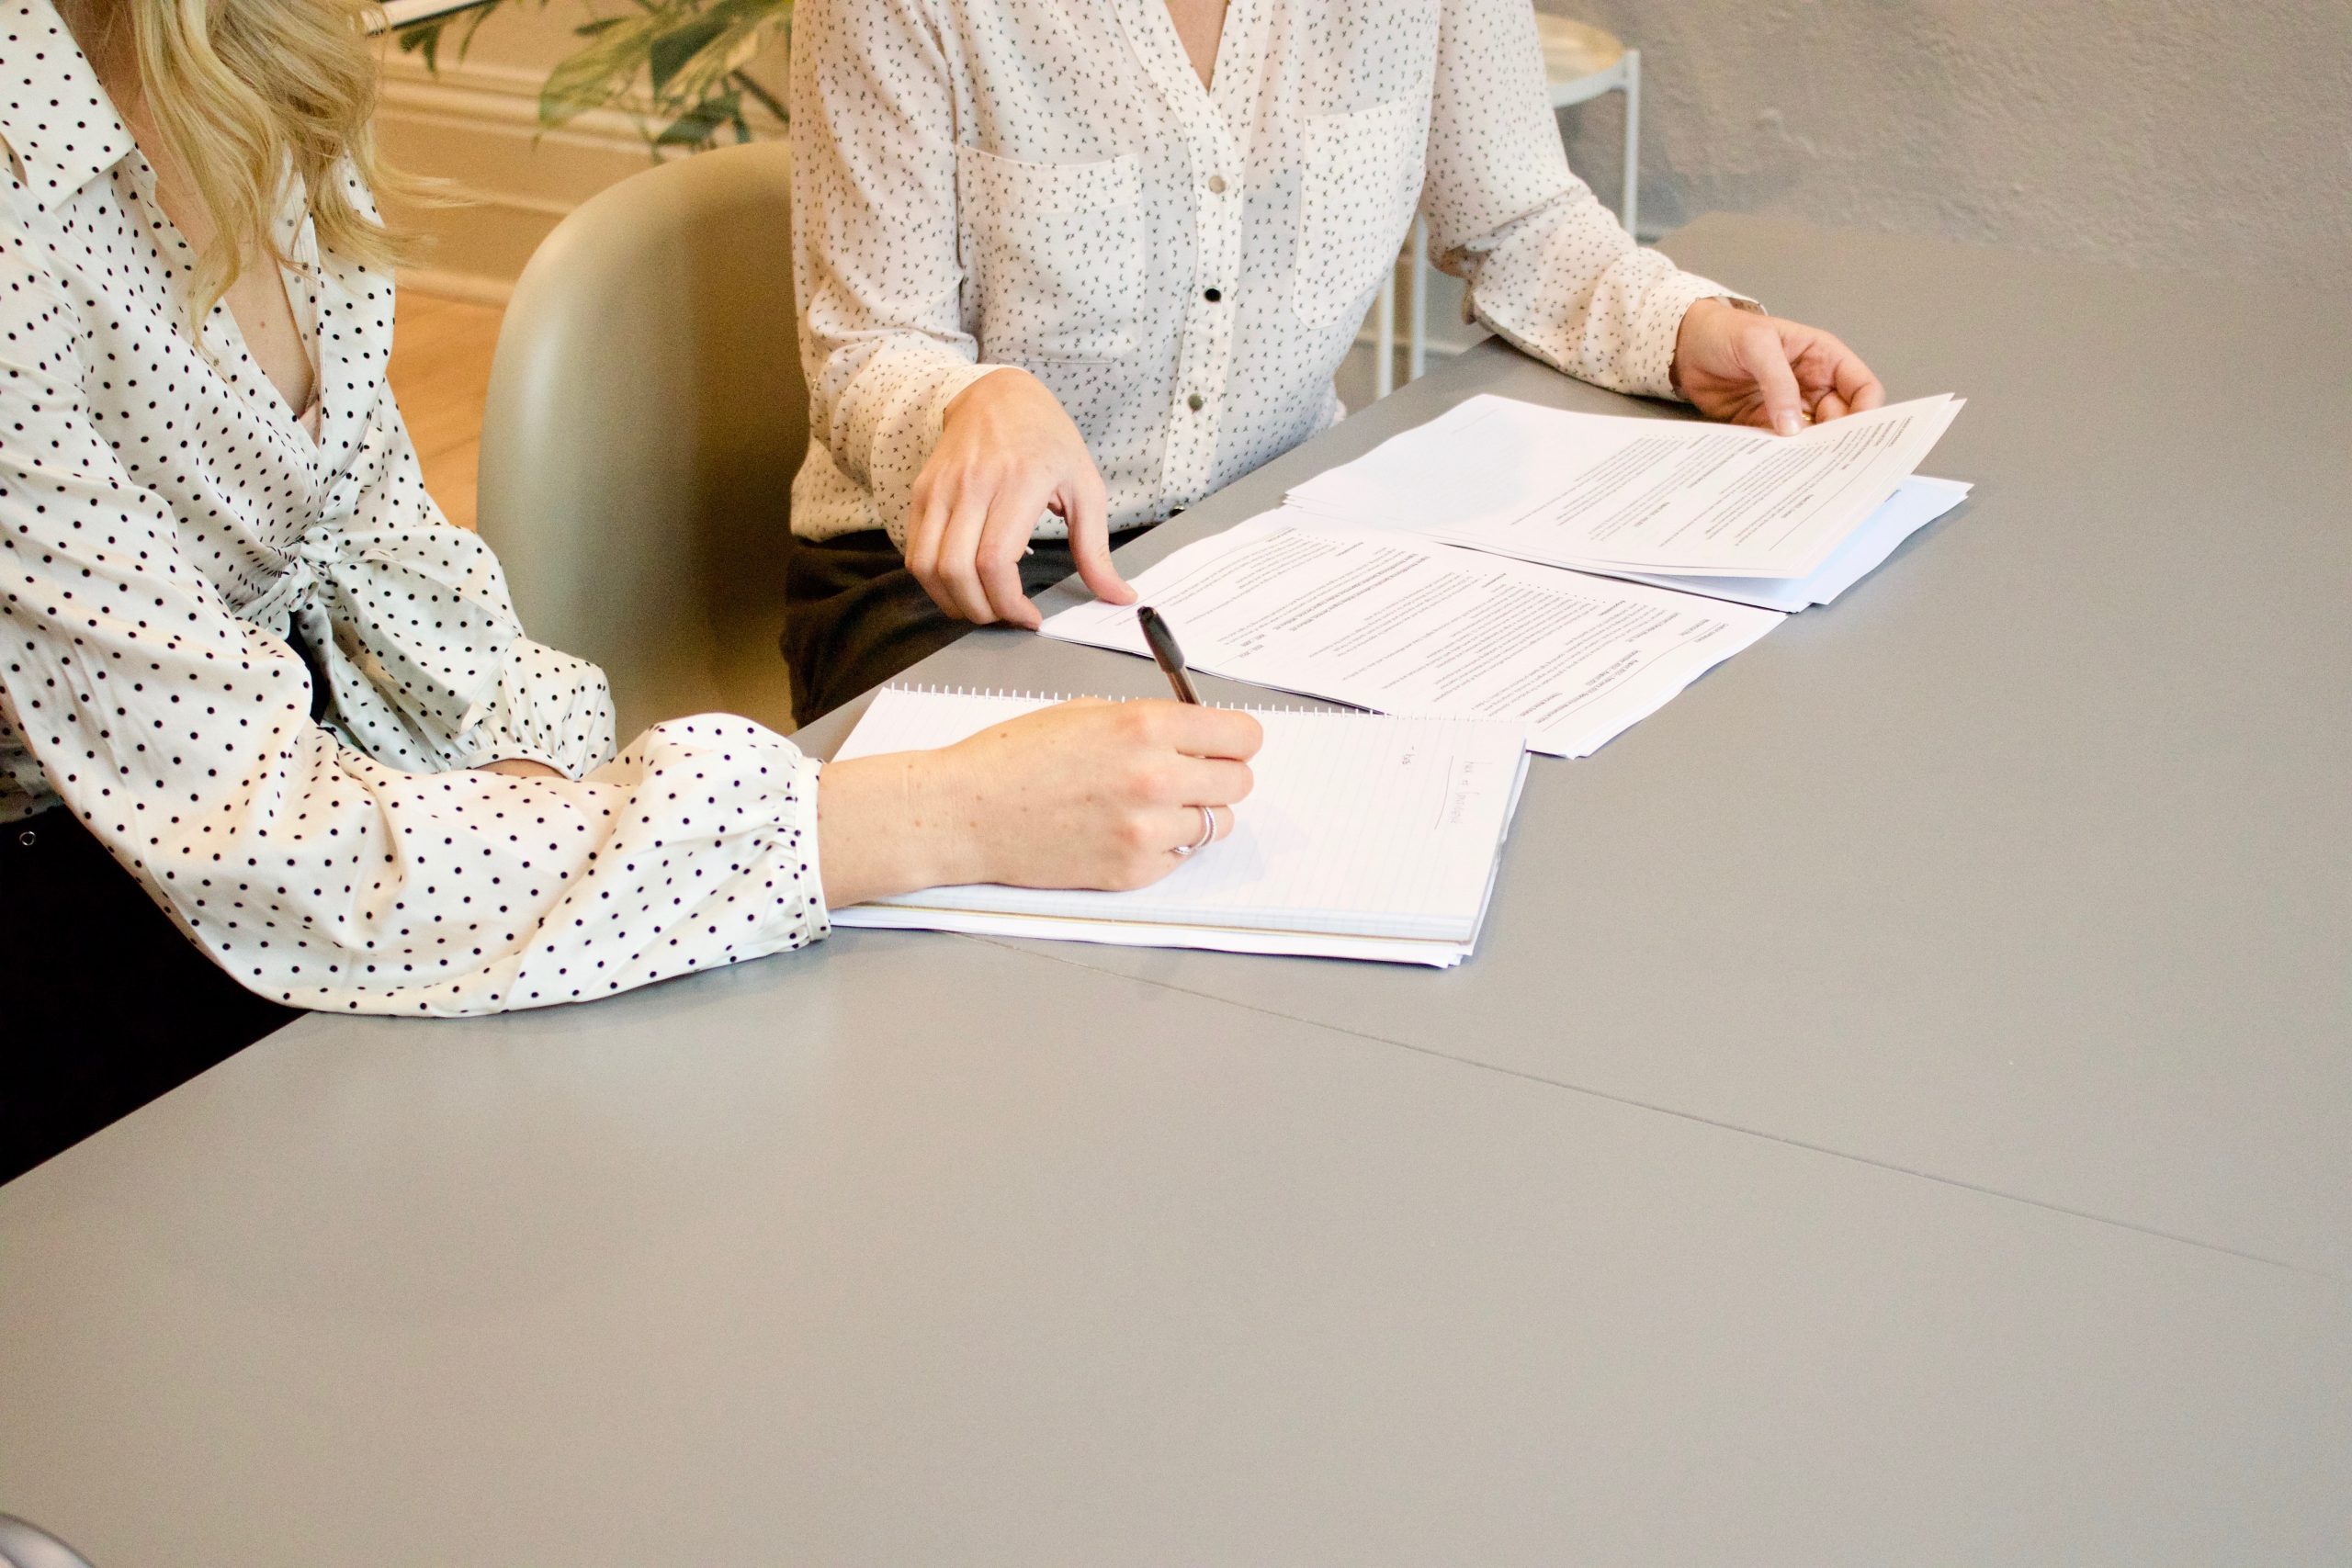 two women having a work meeting with documents